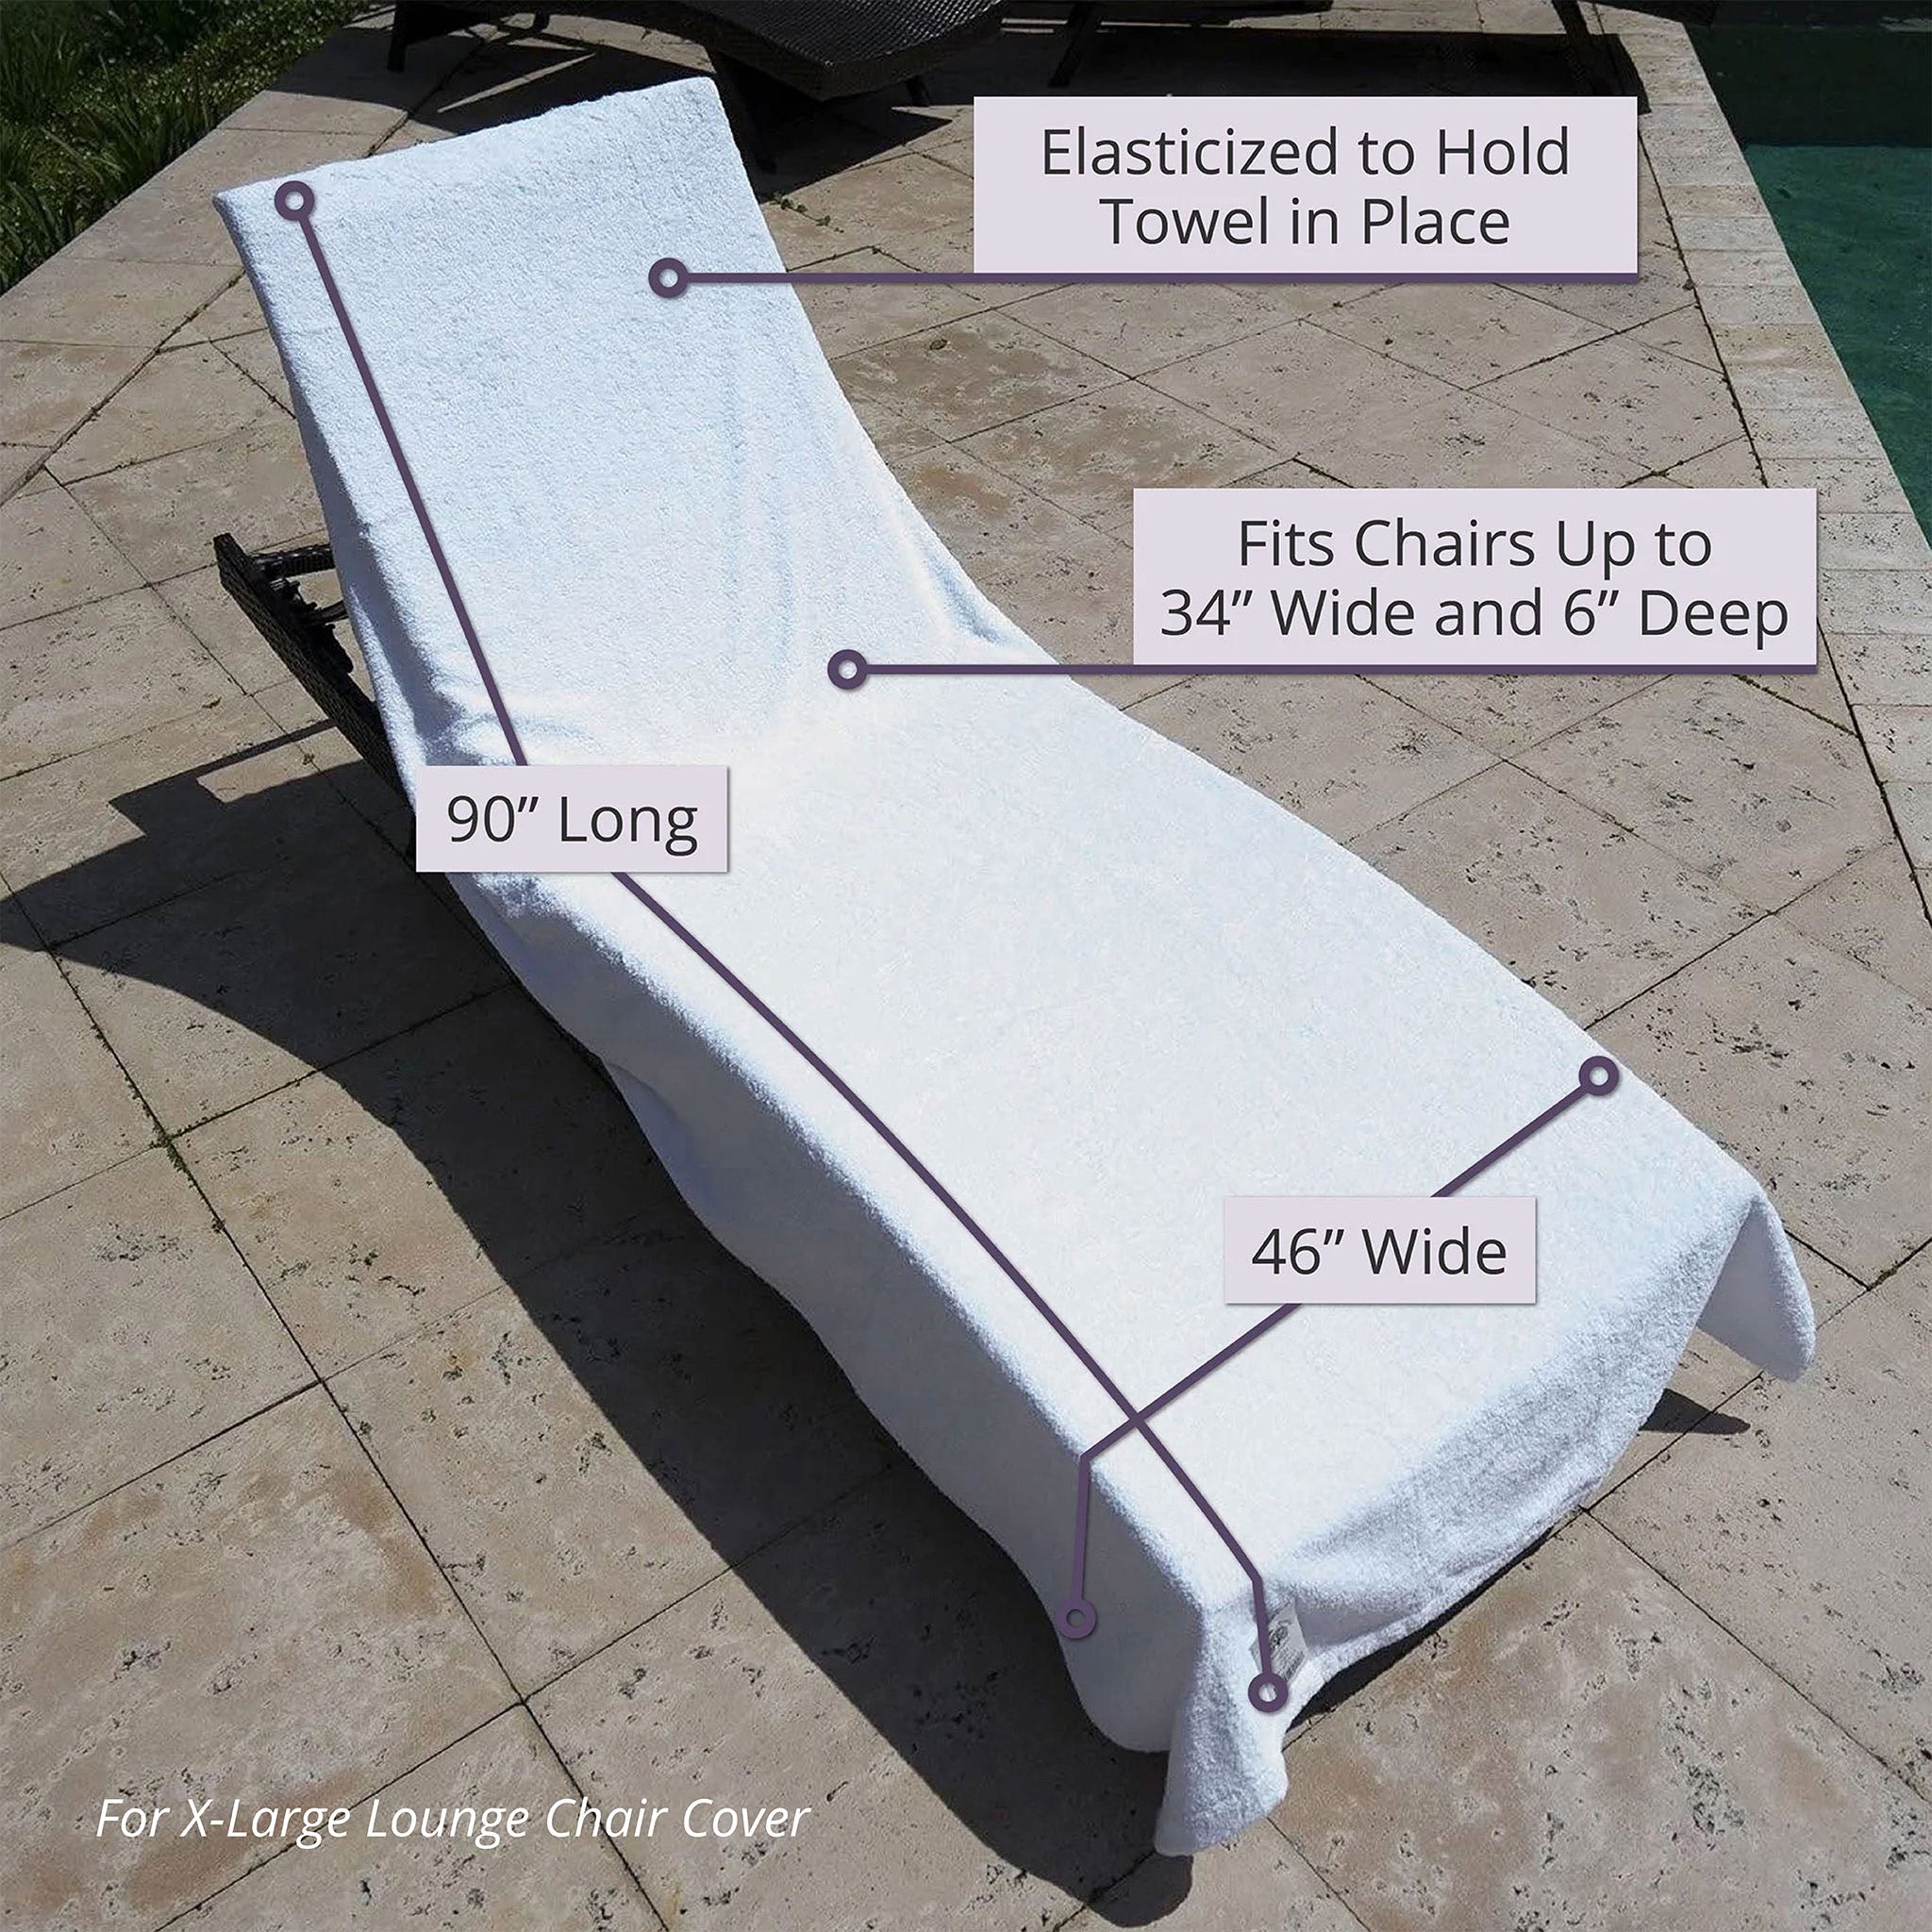 Need an outdoor hot tub towel and robe warmer? DIY with household items